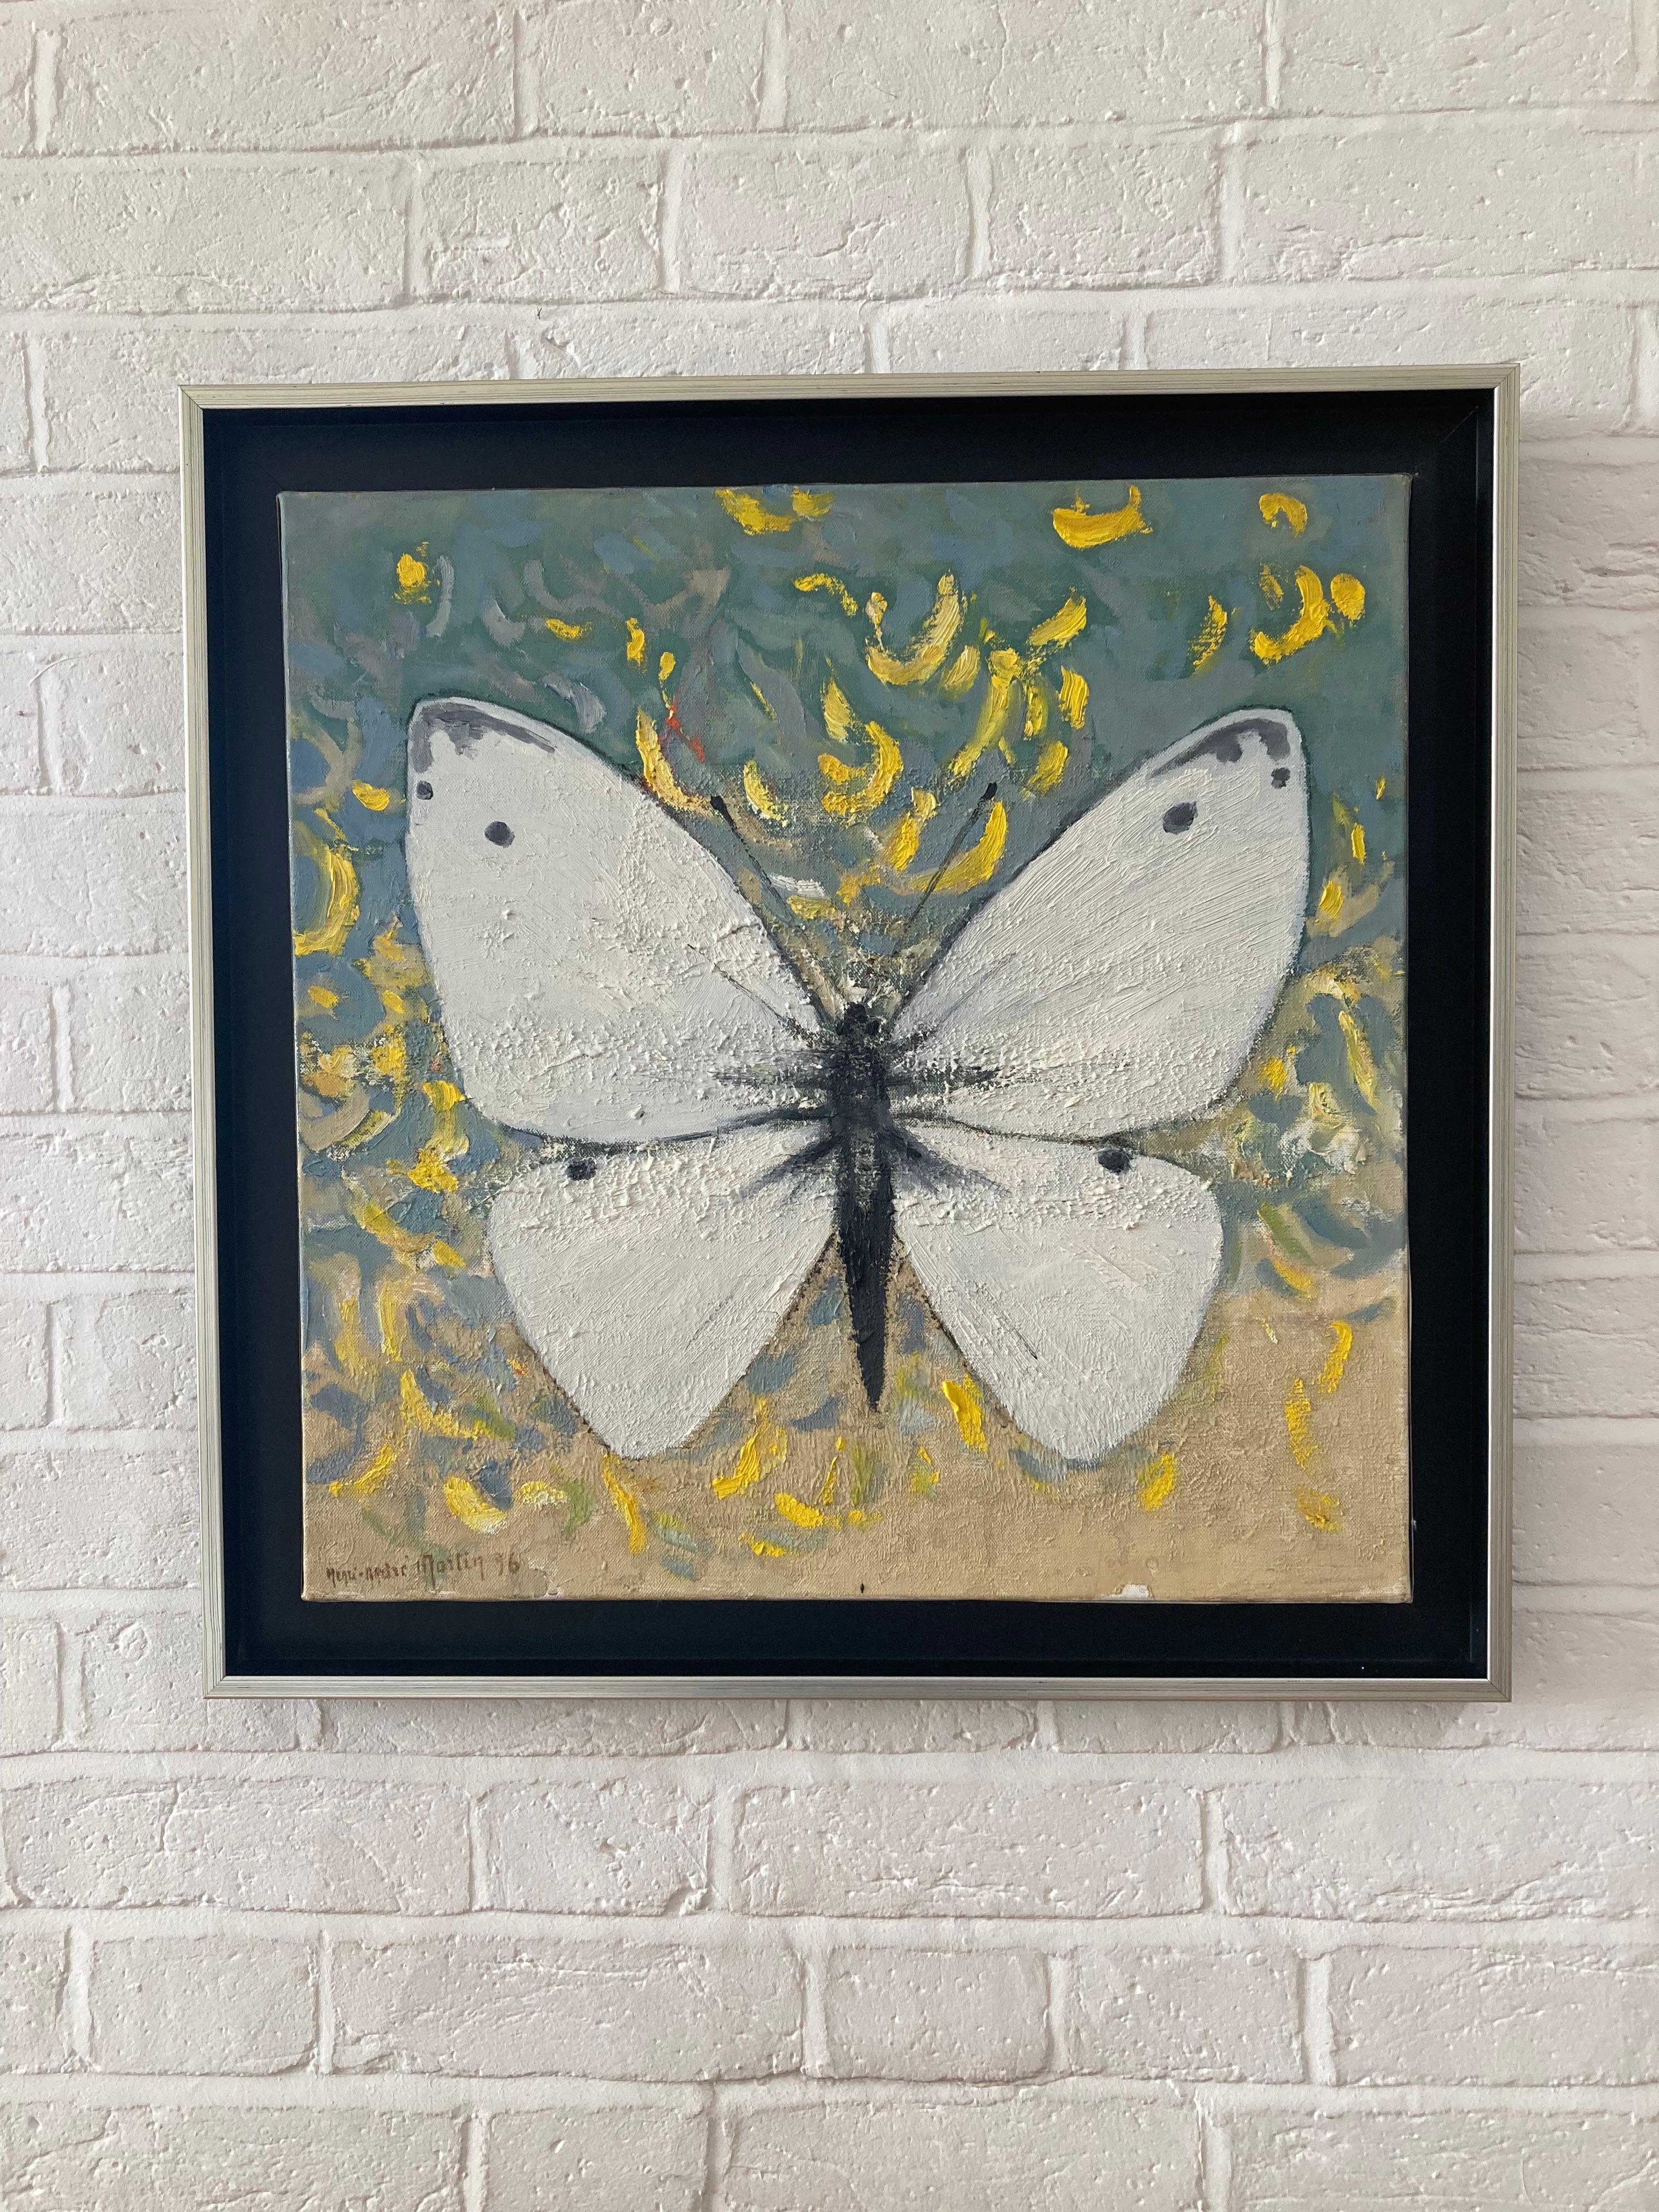 An incredibly striking image of a white butterfly set against a background of yellow petals. Painted with great energy and with a most appealing texture to the paint surface. This looks stunning against a white wall.

Henri-André Martin